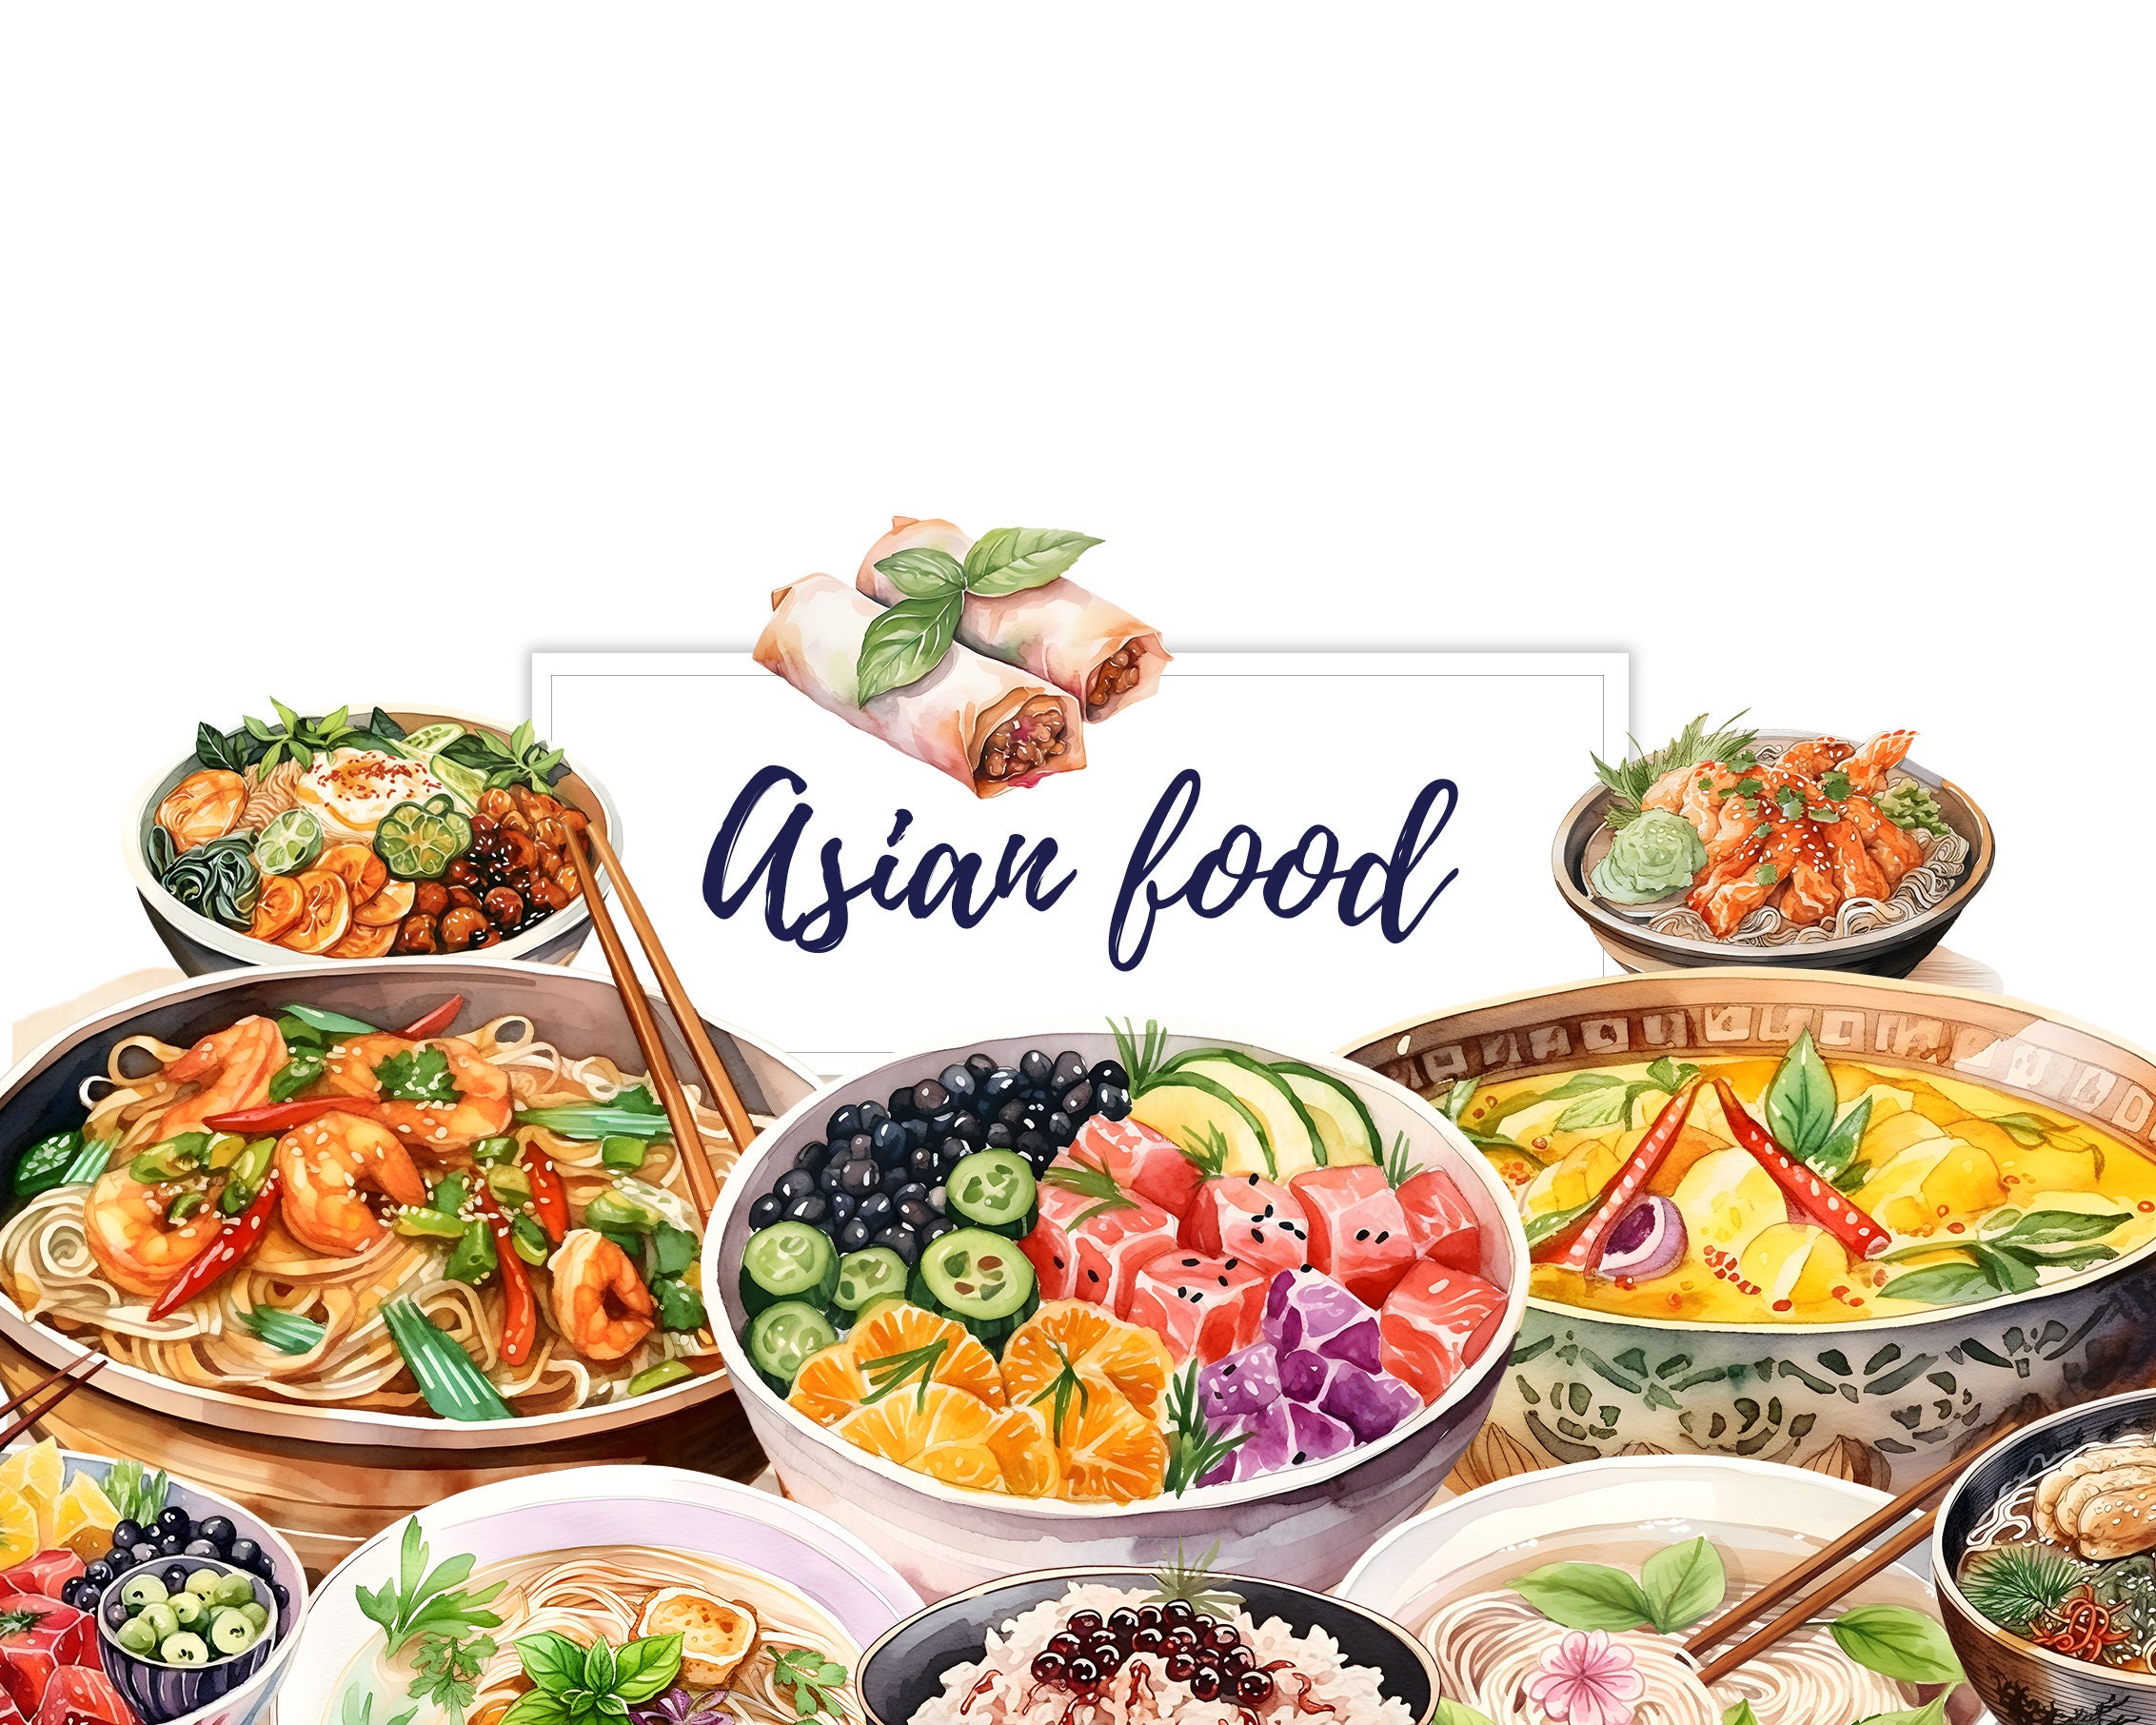 44 Asian Food Stickers, Food & Drink Theme Planner Journal